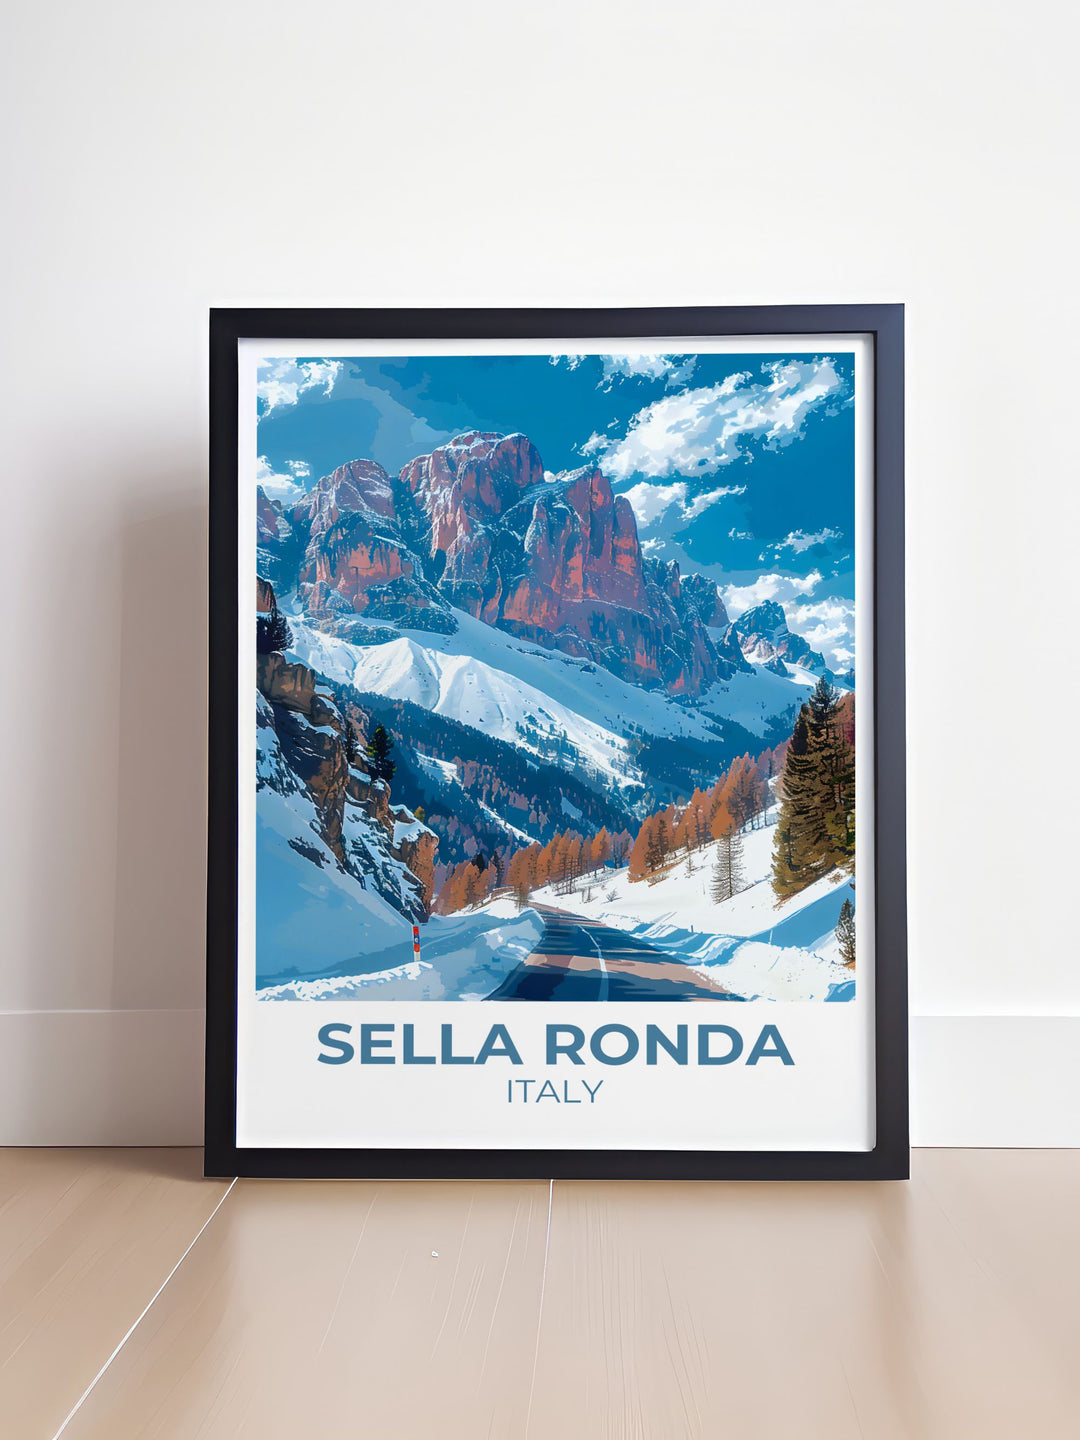 Experience the elegance of Sella Ronda Ski Circuit with our Framed Art, showcasing dynamic slopes and picturesque alpine scenery in stunning detail.